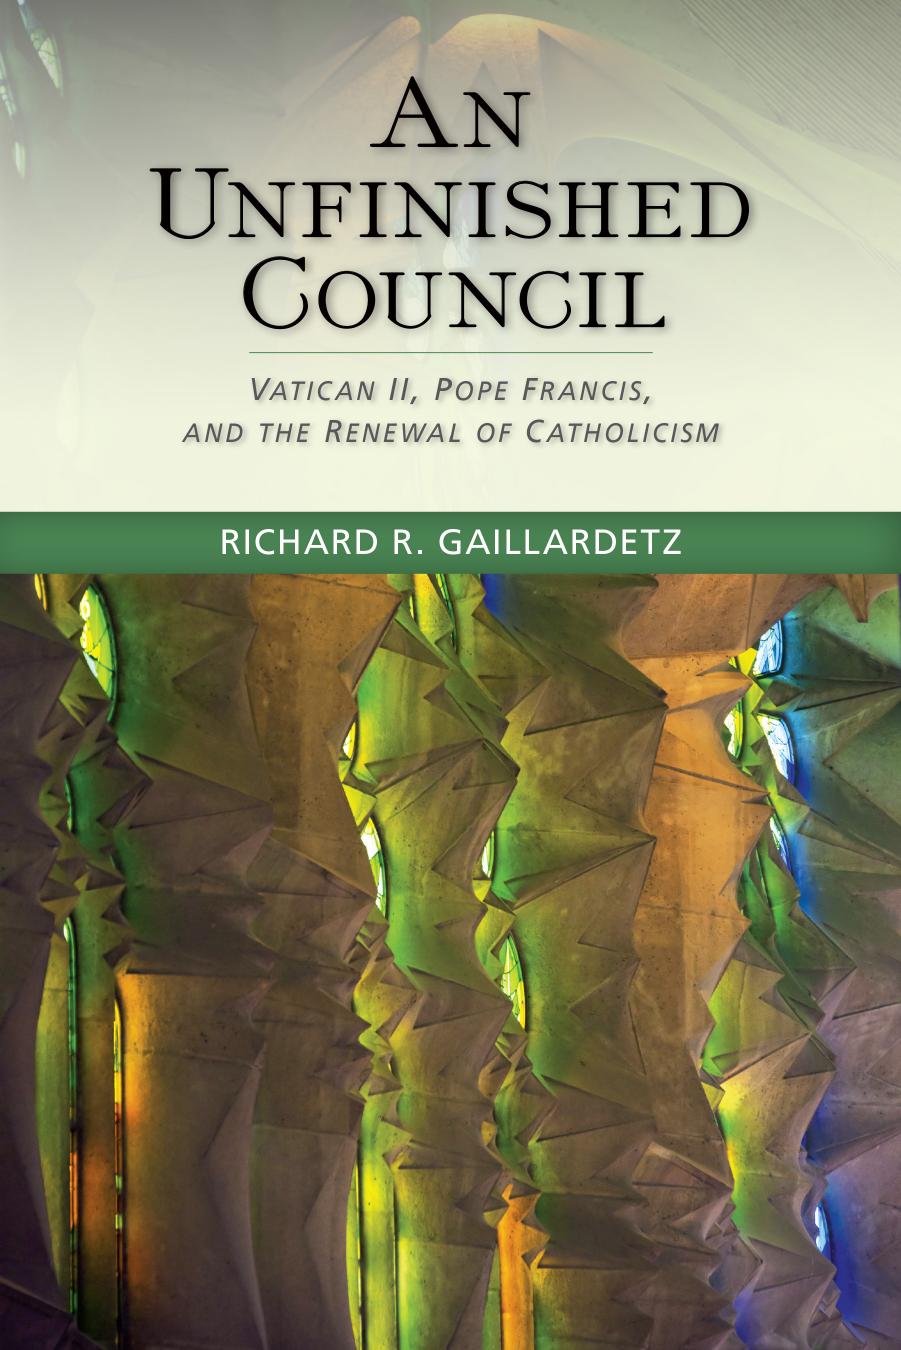 An Unfinished Council: Vatican II, Pope Francis, and the Renewal of Catholicism by Richard R. Gaillardetz